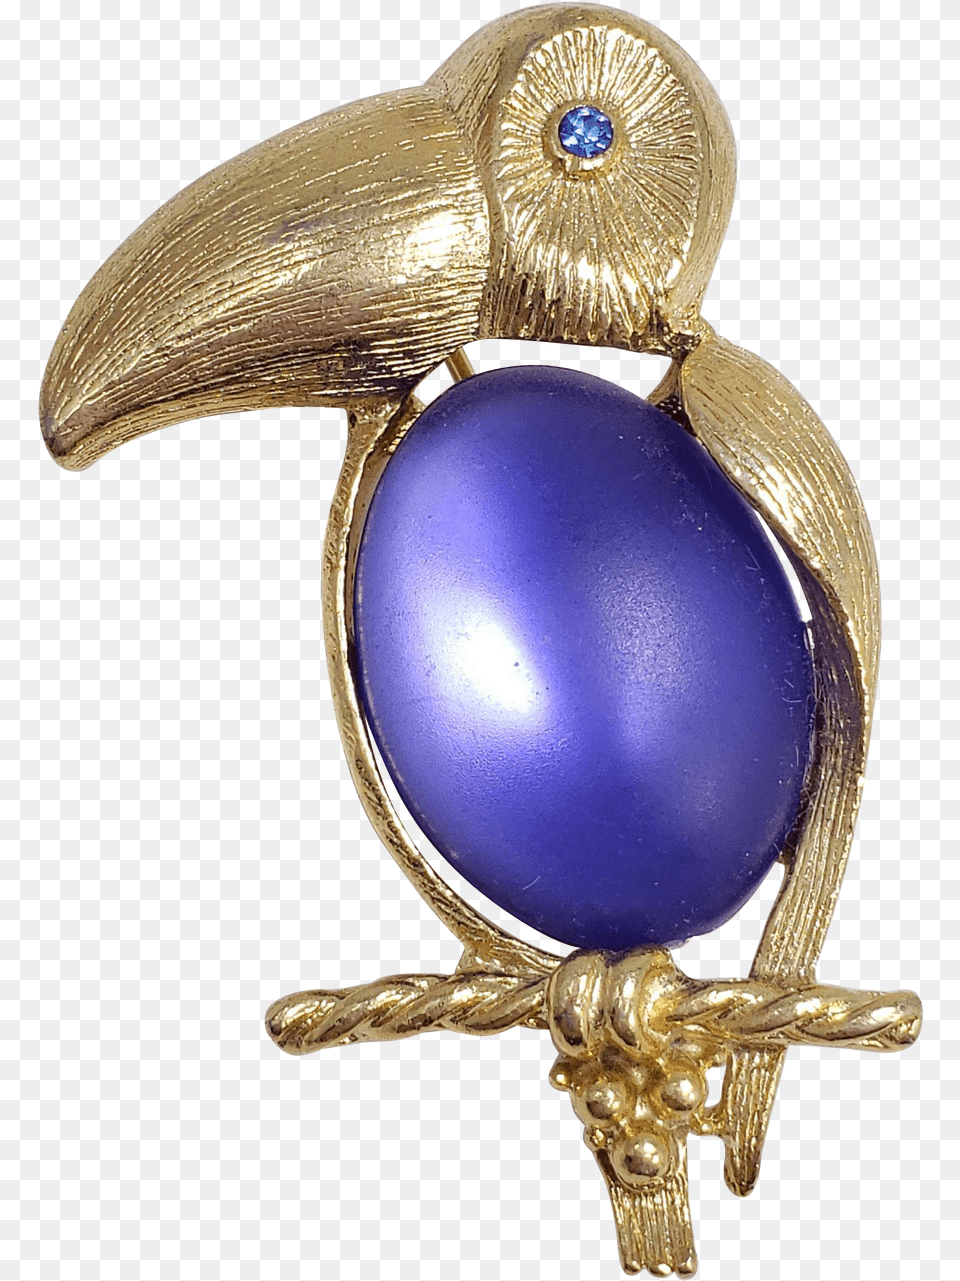 Sarah Coventry Blue Jelly Belly Tucan Bird Pin Brooch Gemstone, Accessories, Jewelry Png Image